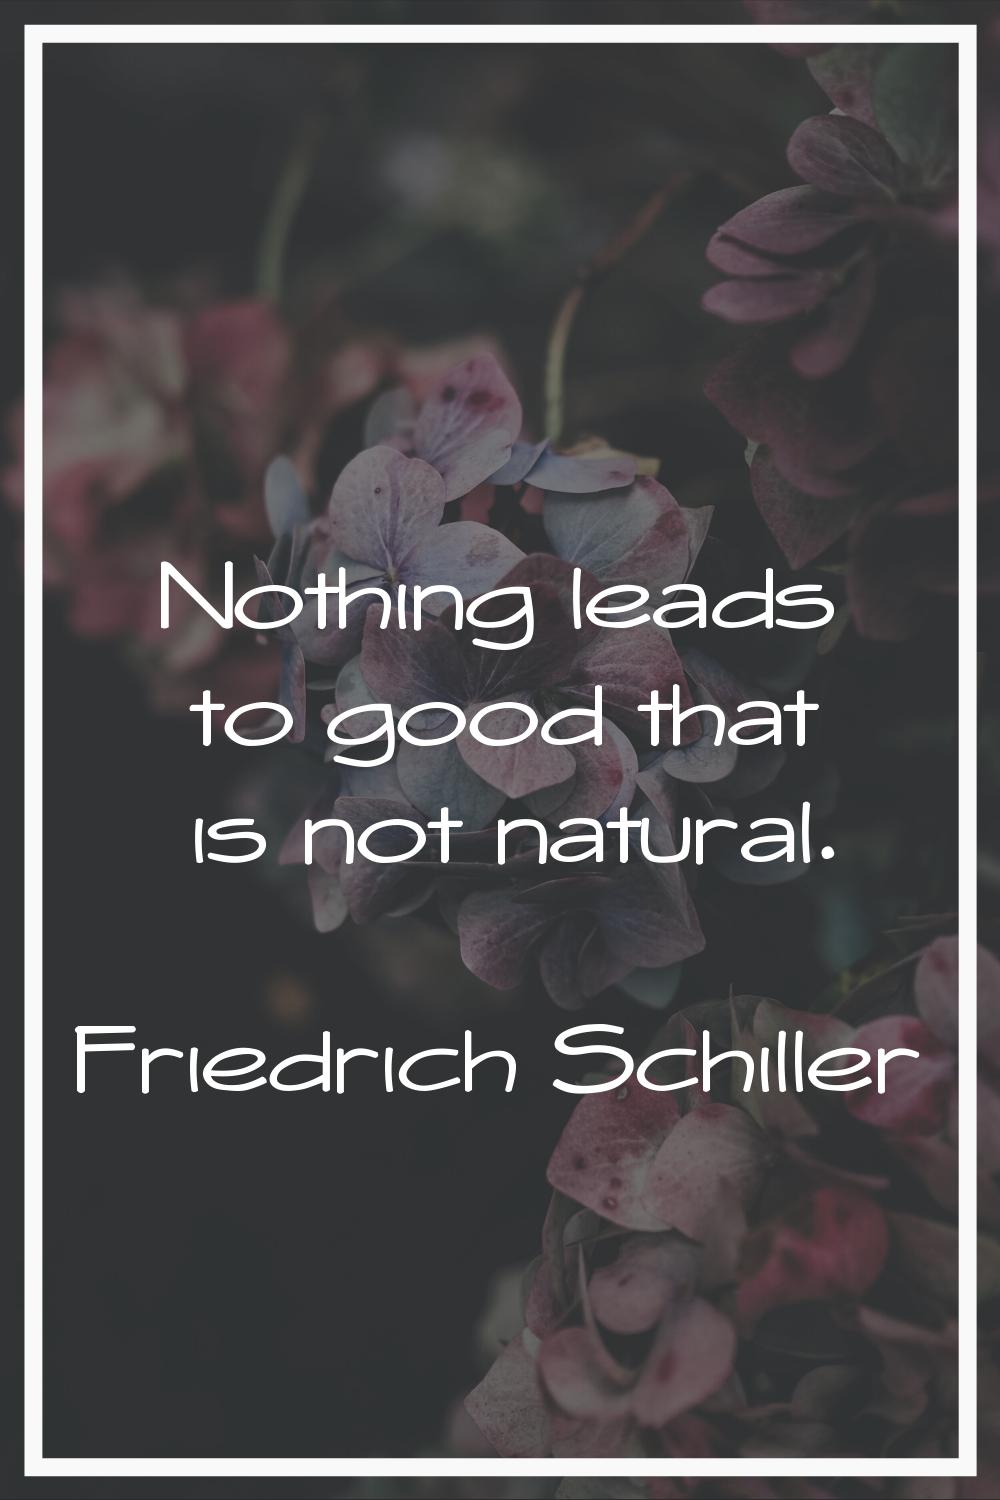 Nothing leads to good that is not natural.